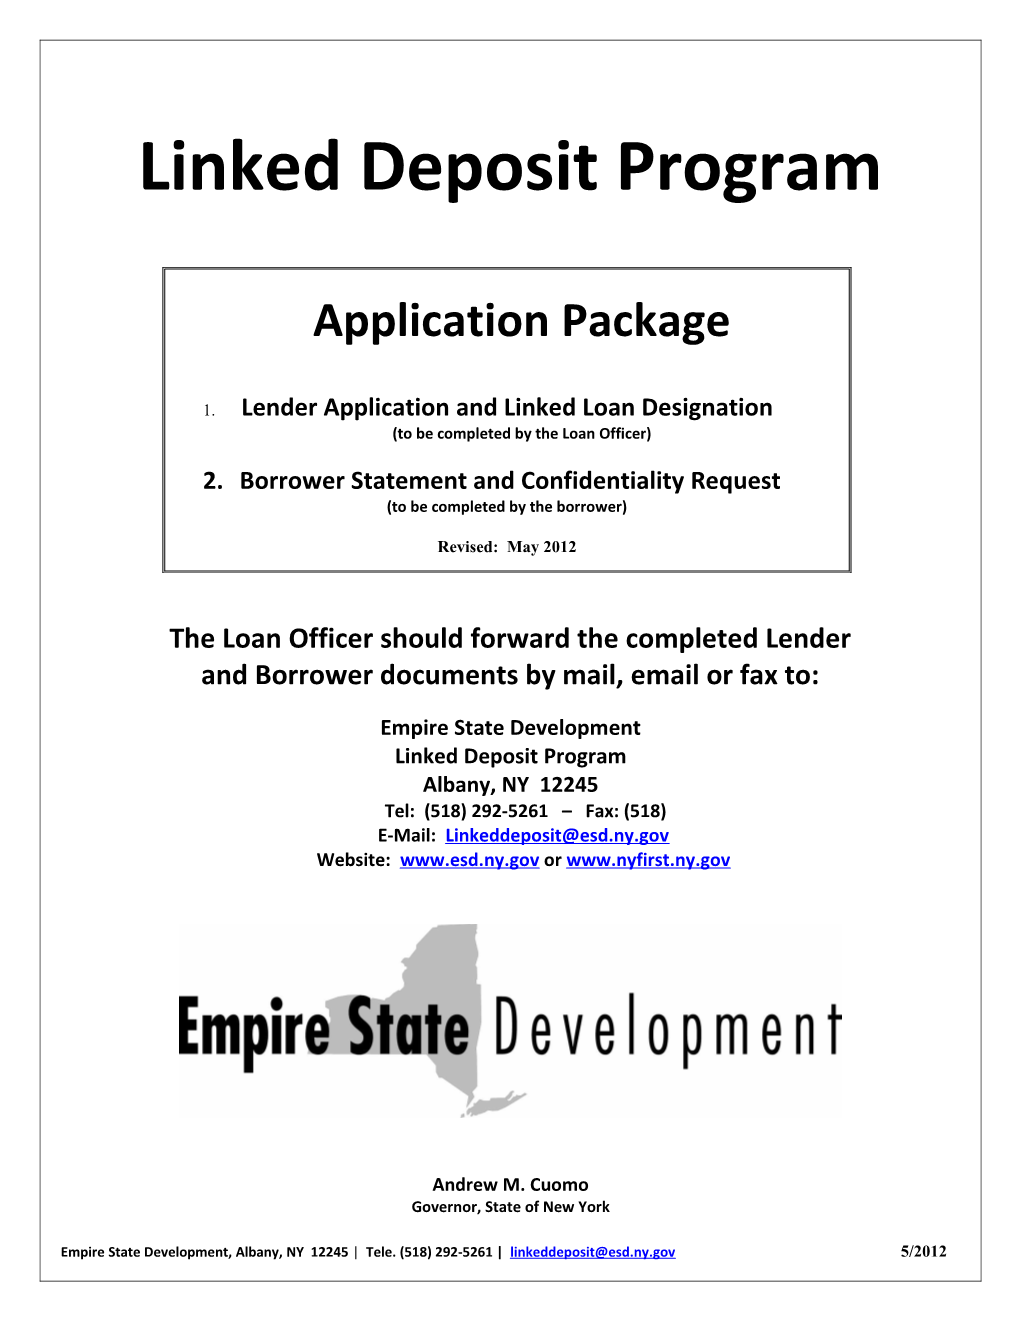 The Loan Officer Should Forward the Completed Lender